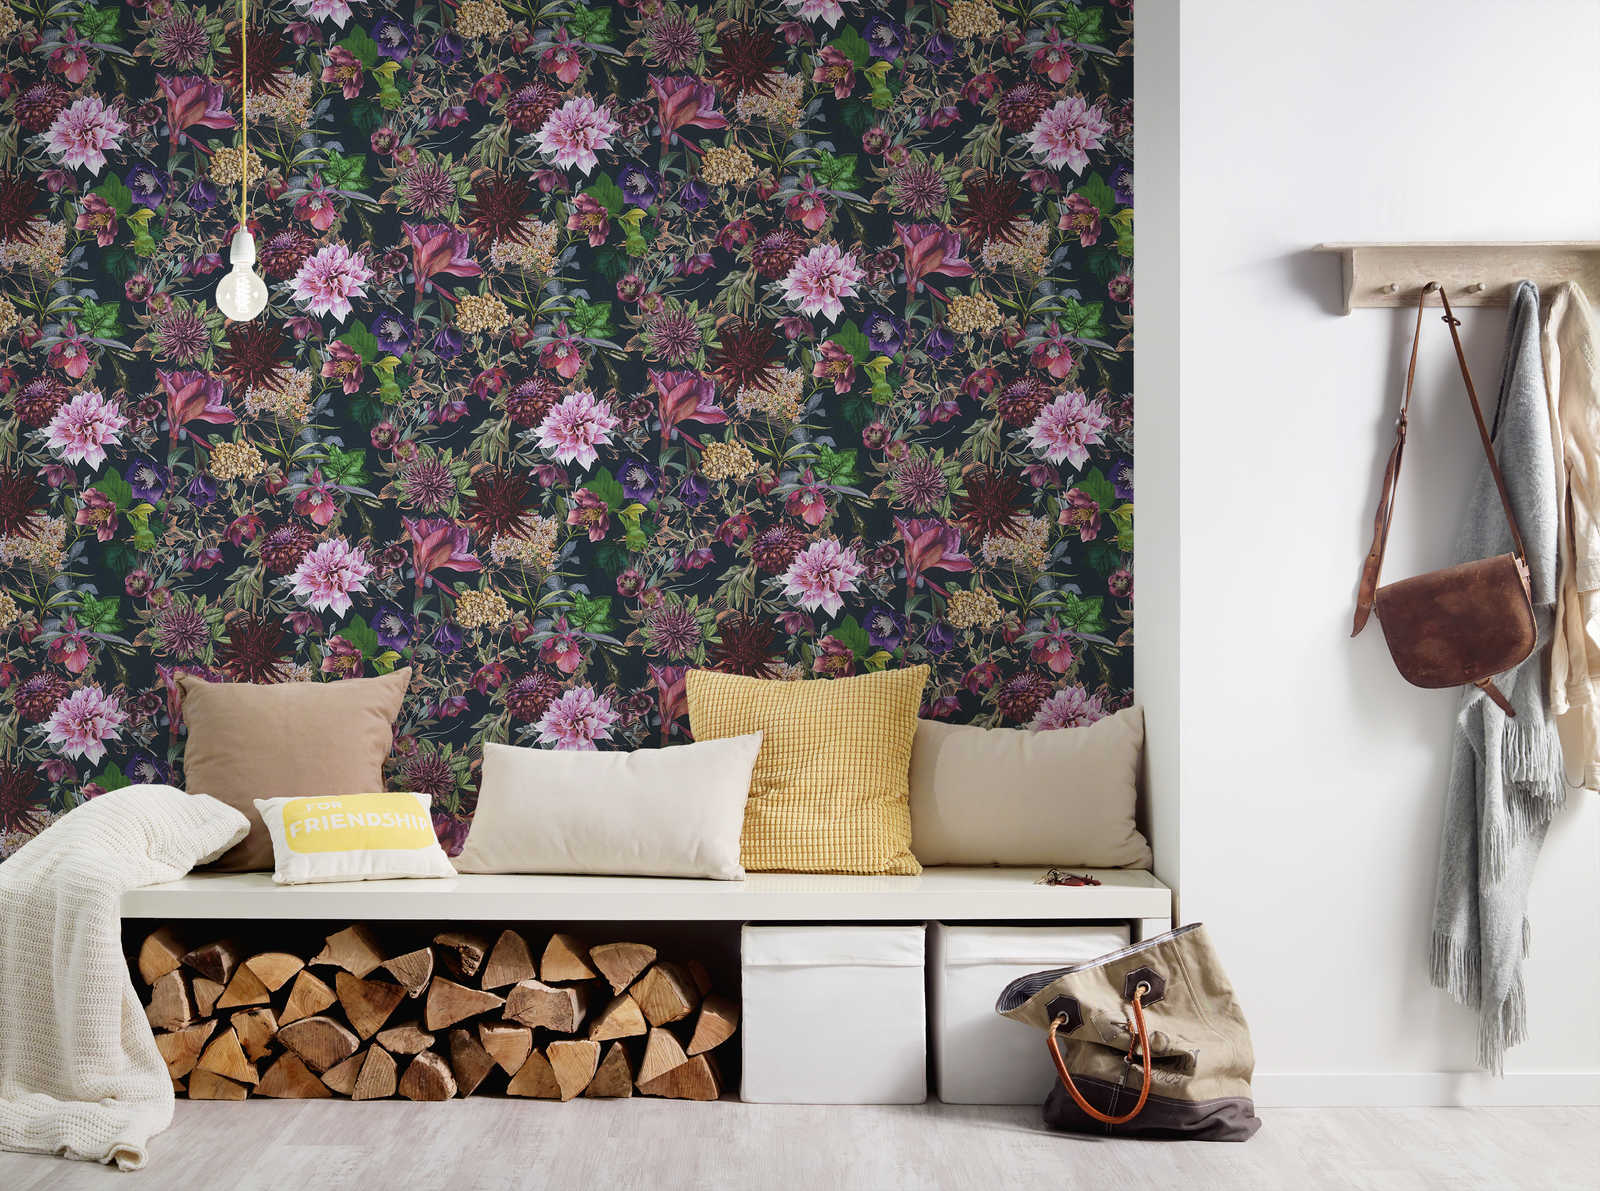             Black wallpaper with colourful flowers - pink, black
        